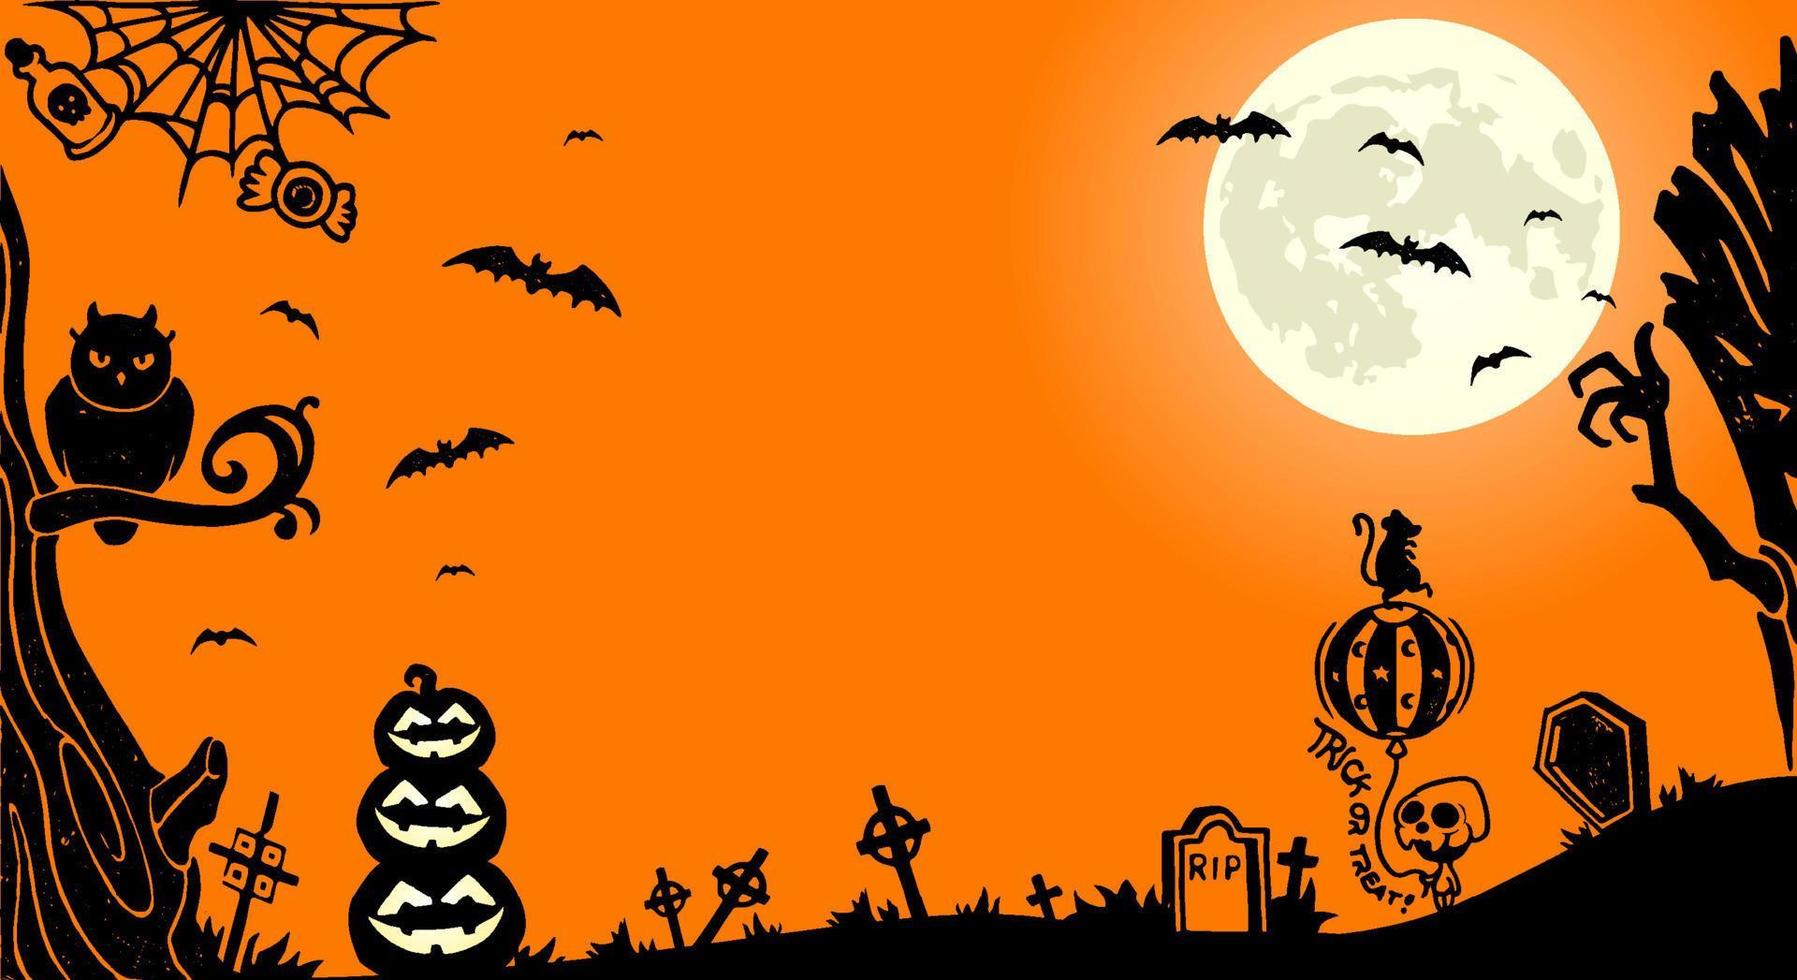 Halloween night background with a cemetery, pumpkins and moon. vector